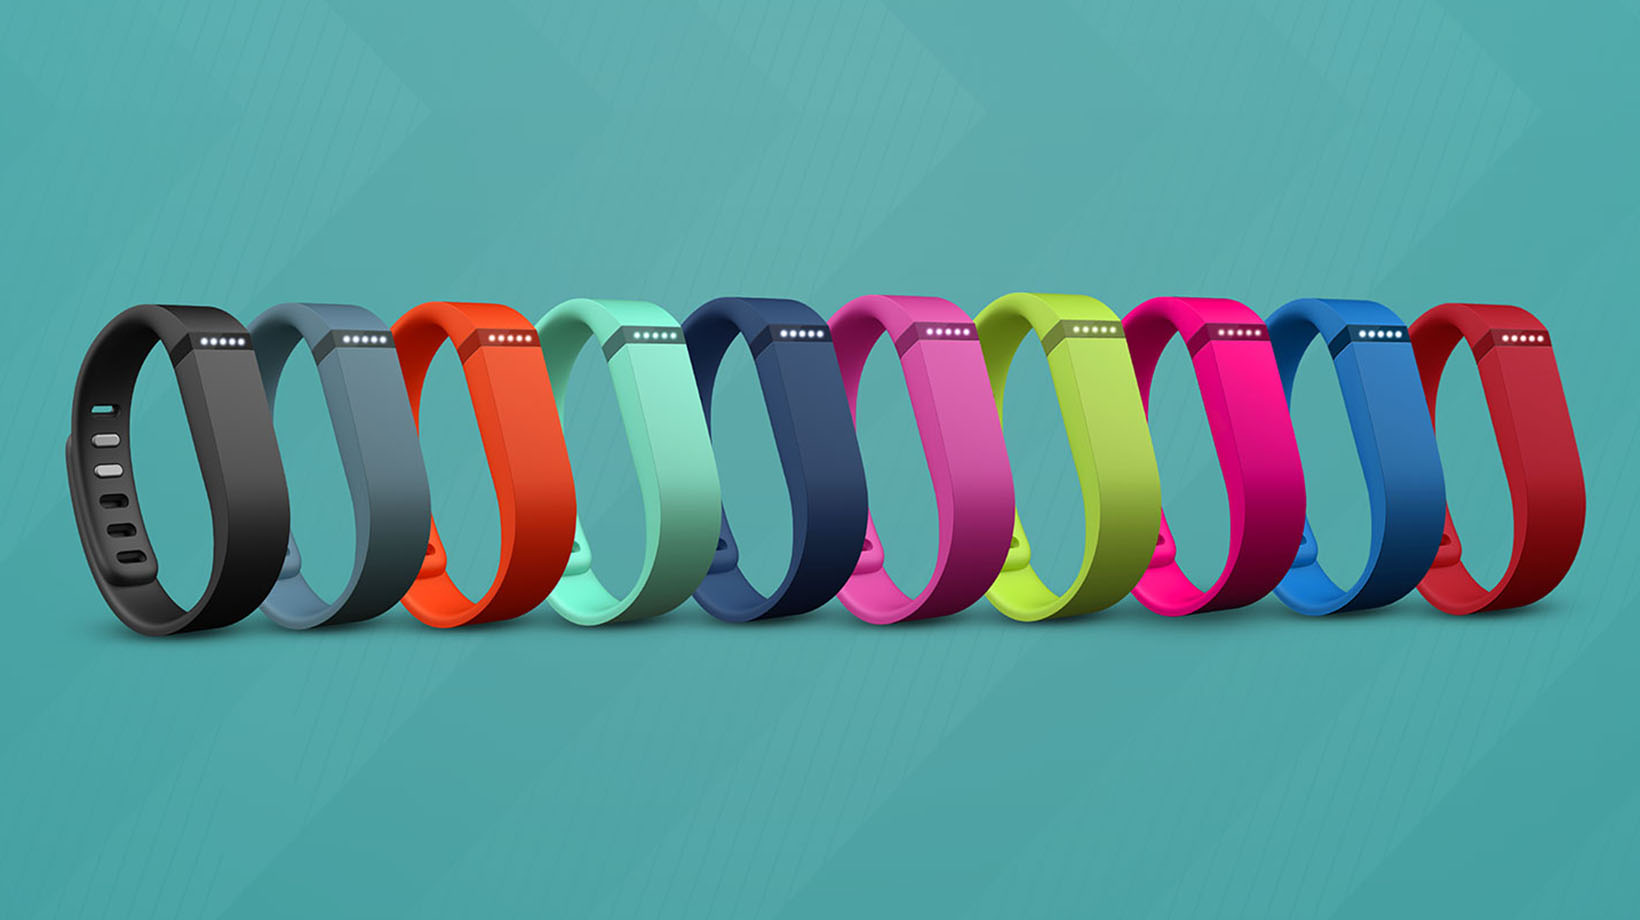 A line of colorful Fitbits or wearables.